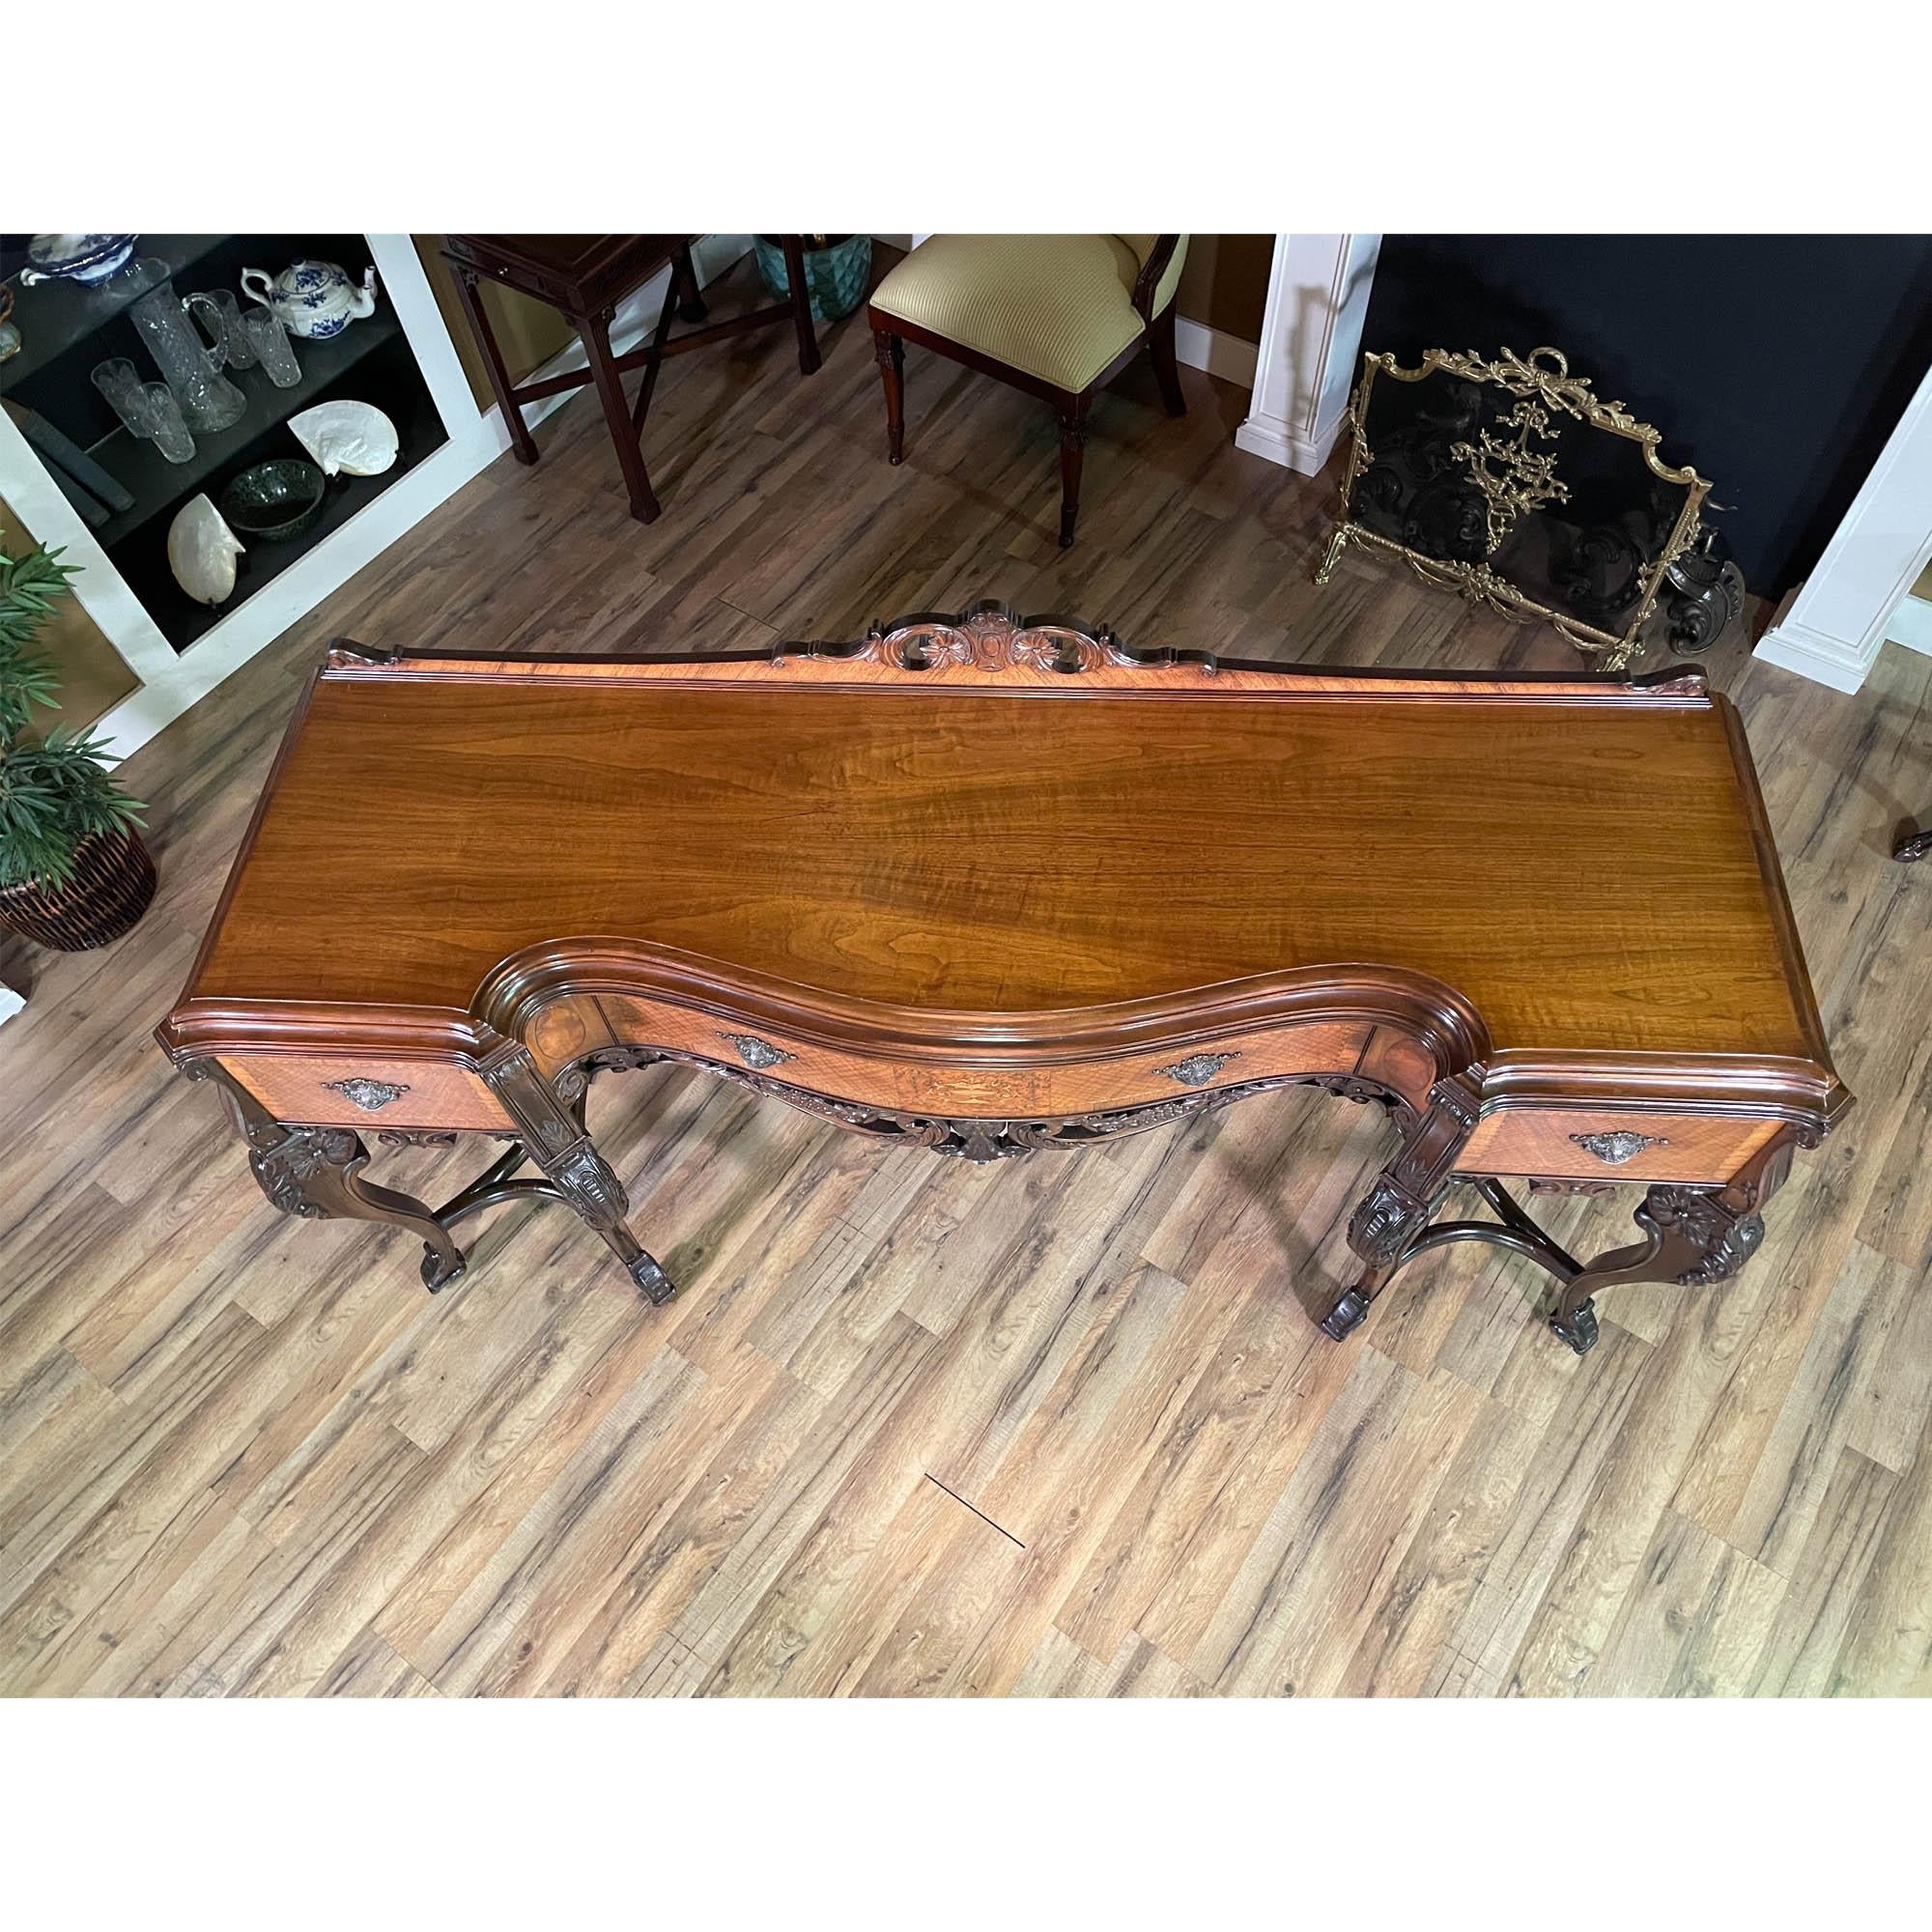 From Niagara Furniture, an Antique Walnut Inlaid Sideboard in overall great original condition.

Both large and incredibly detailed this beautiful Antique Walnut Inlaid Sideboard has everything one could ask for as a focal point for the dining room.